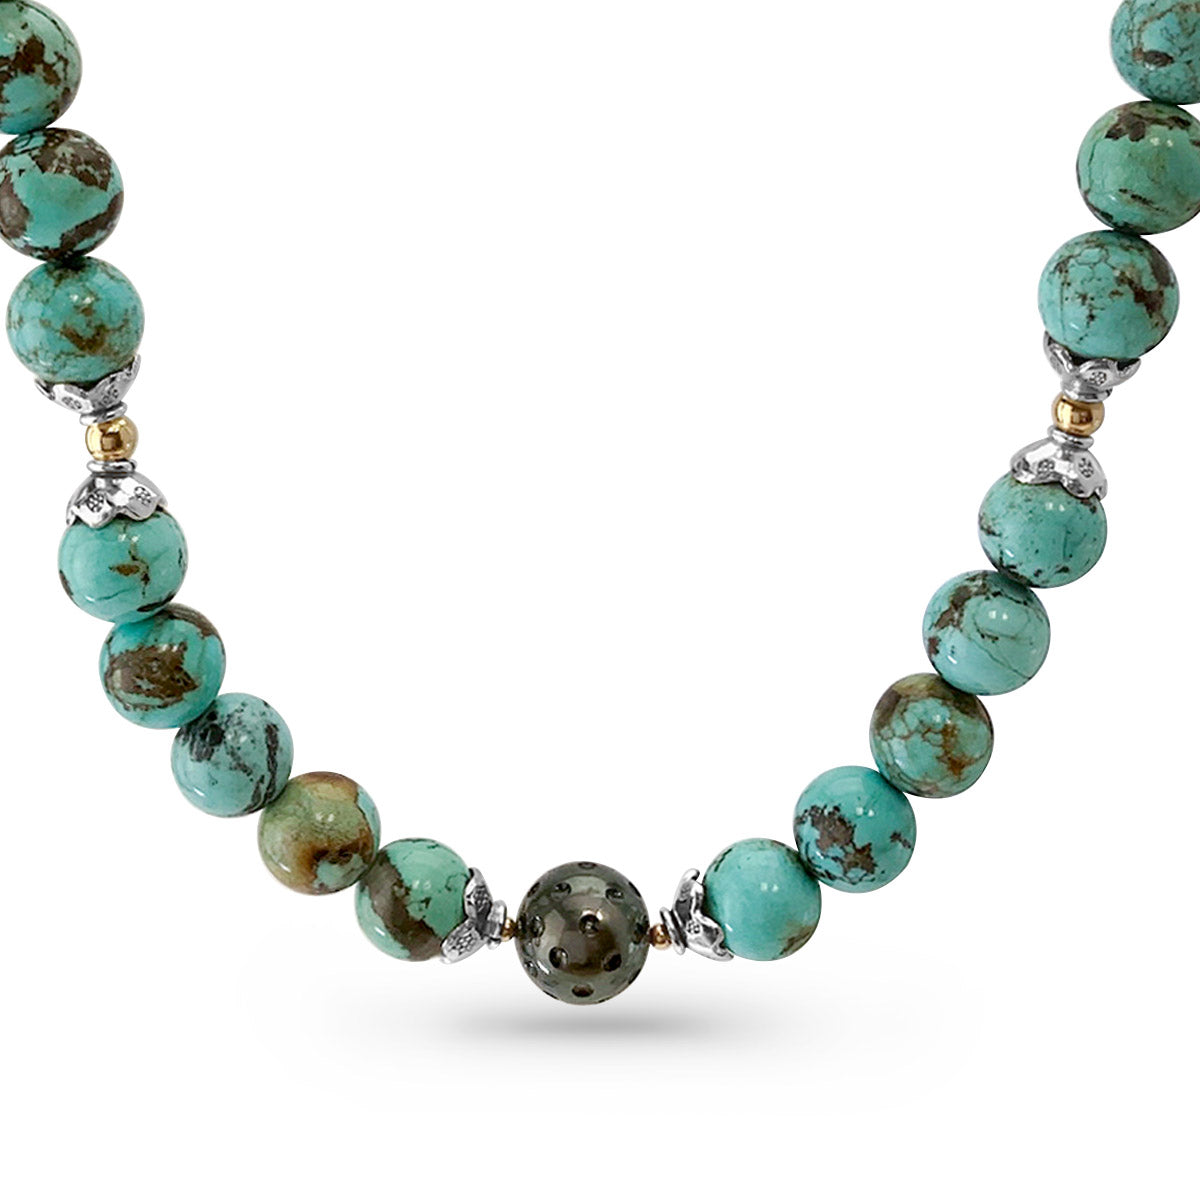 Round Turquoise, Tahitian Pearl & Fine Silver Necklace